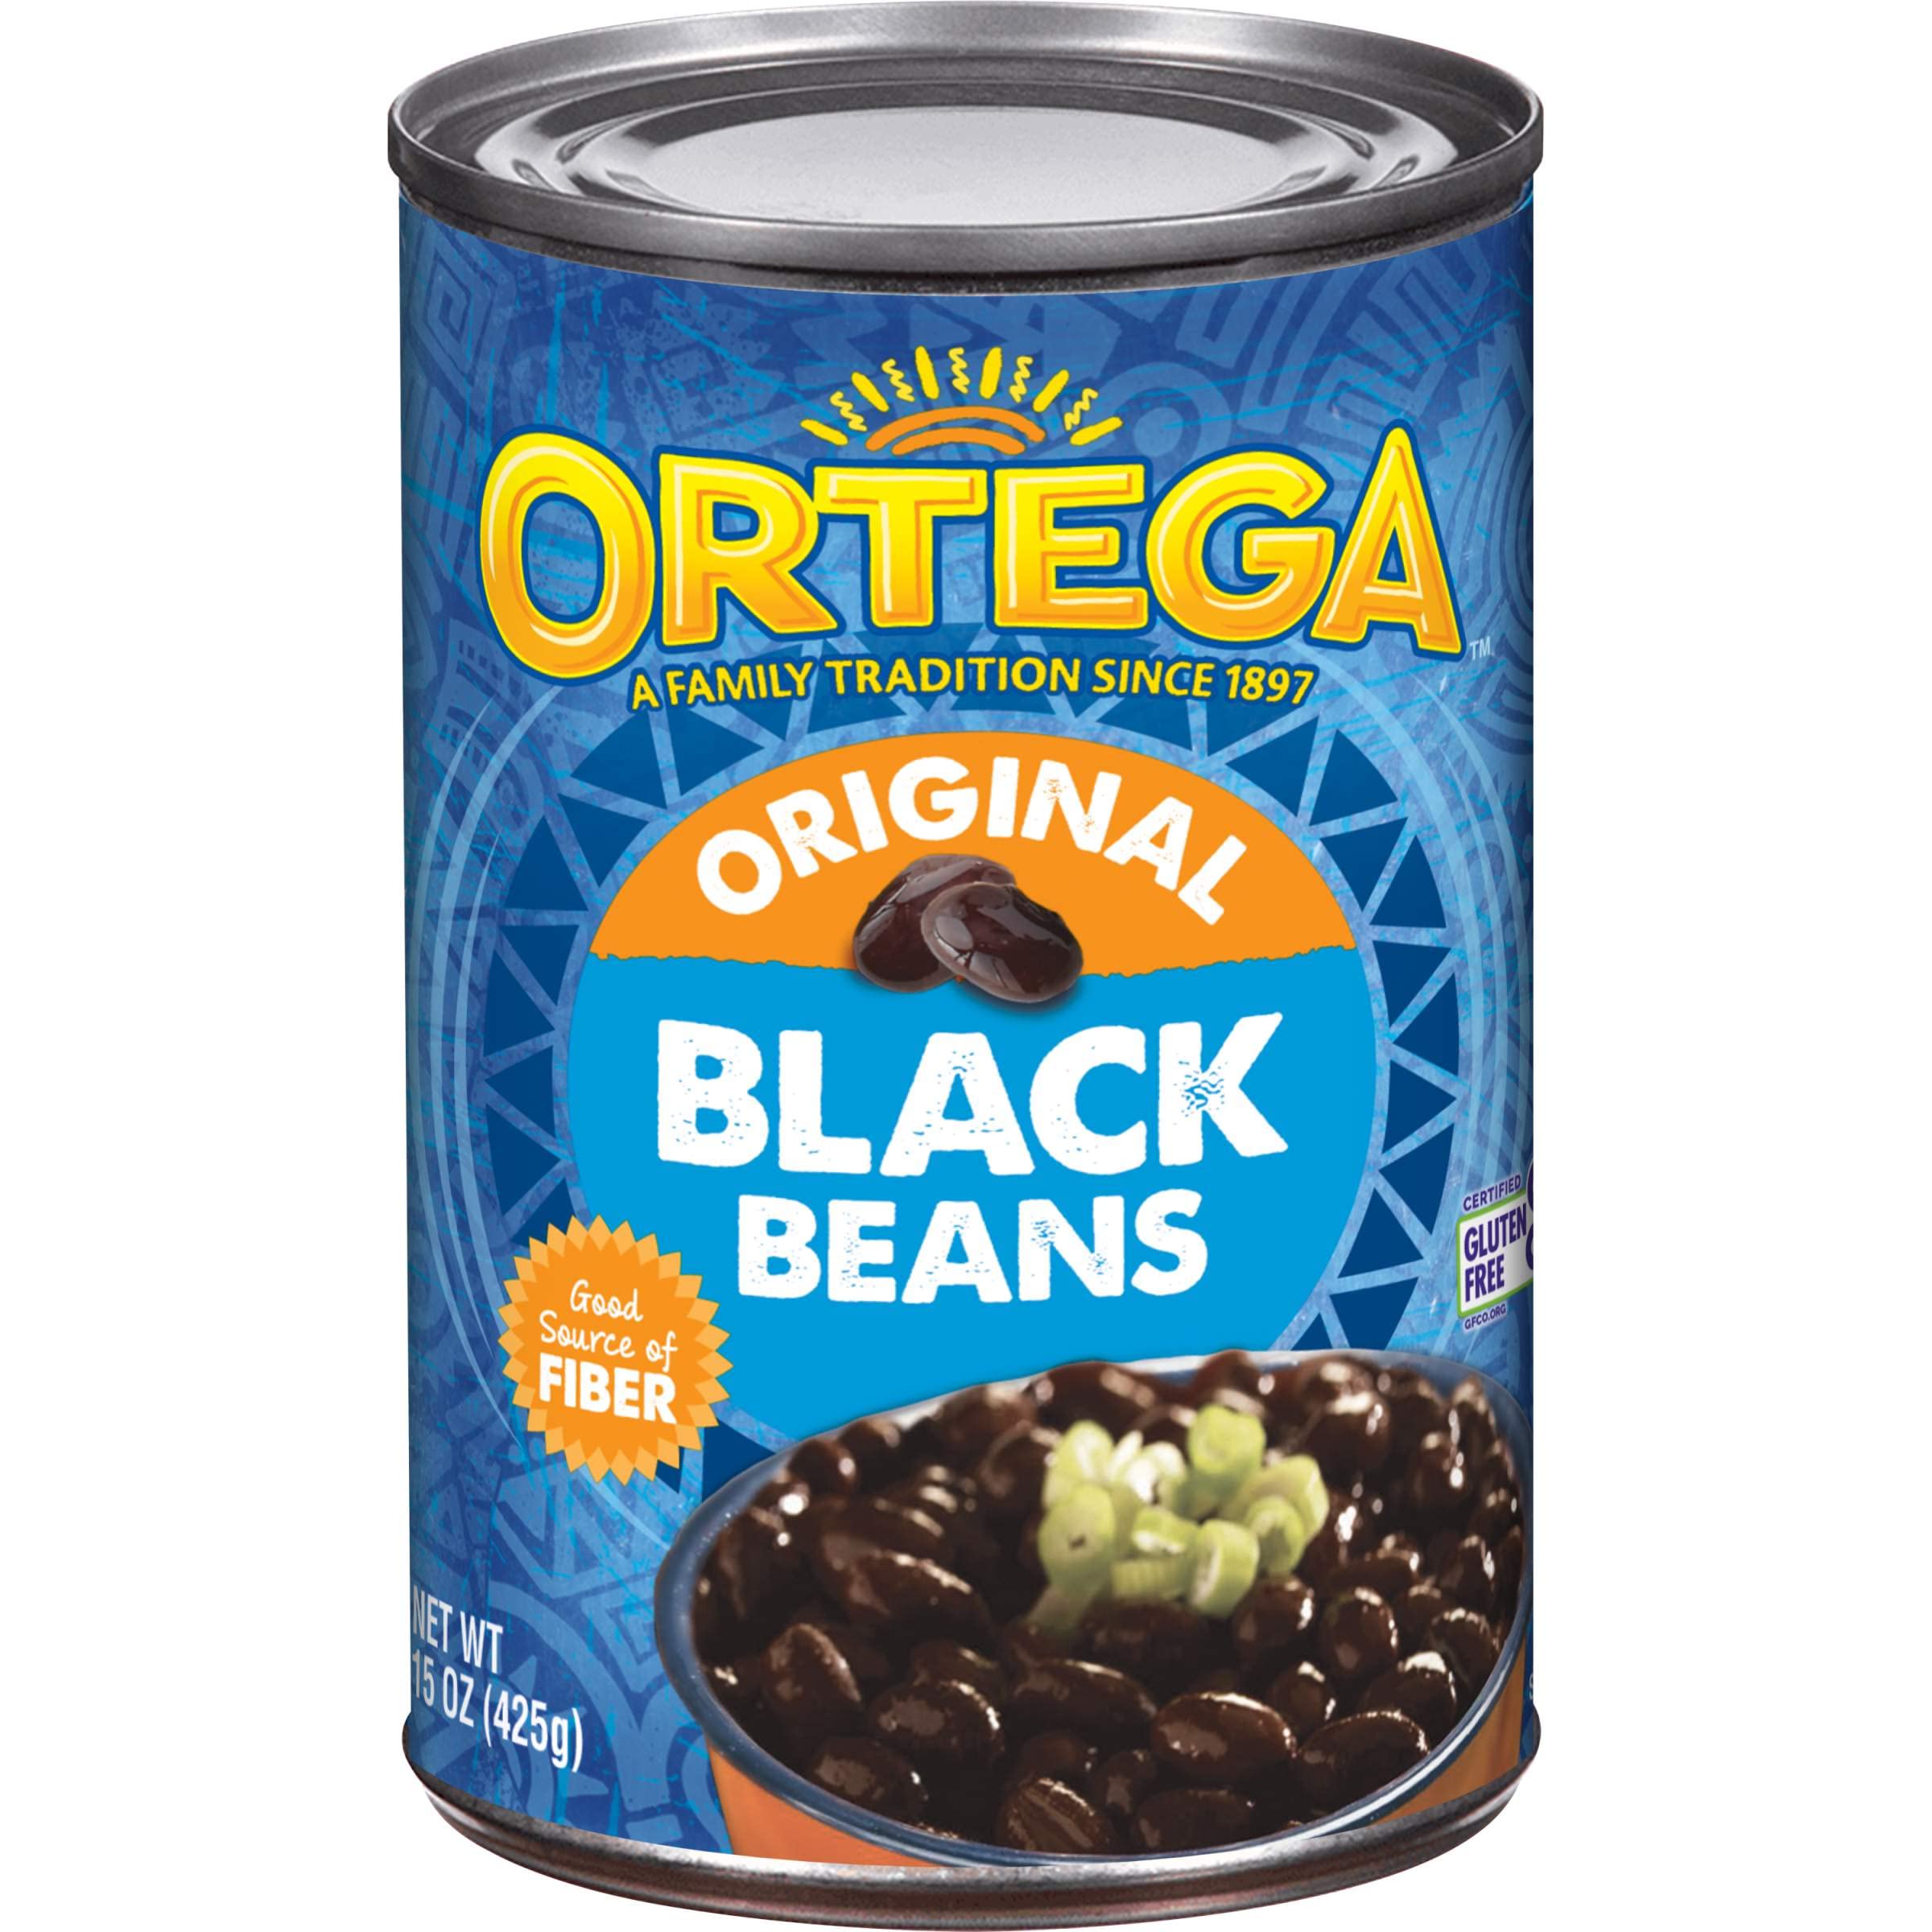 Ortega Black Beans, Original Flavor, 15 Ounce (Pack of 12) - $9.49 w/ Subscribe & Save ($0.79/can)